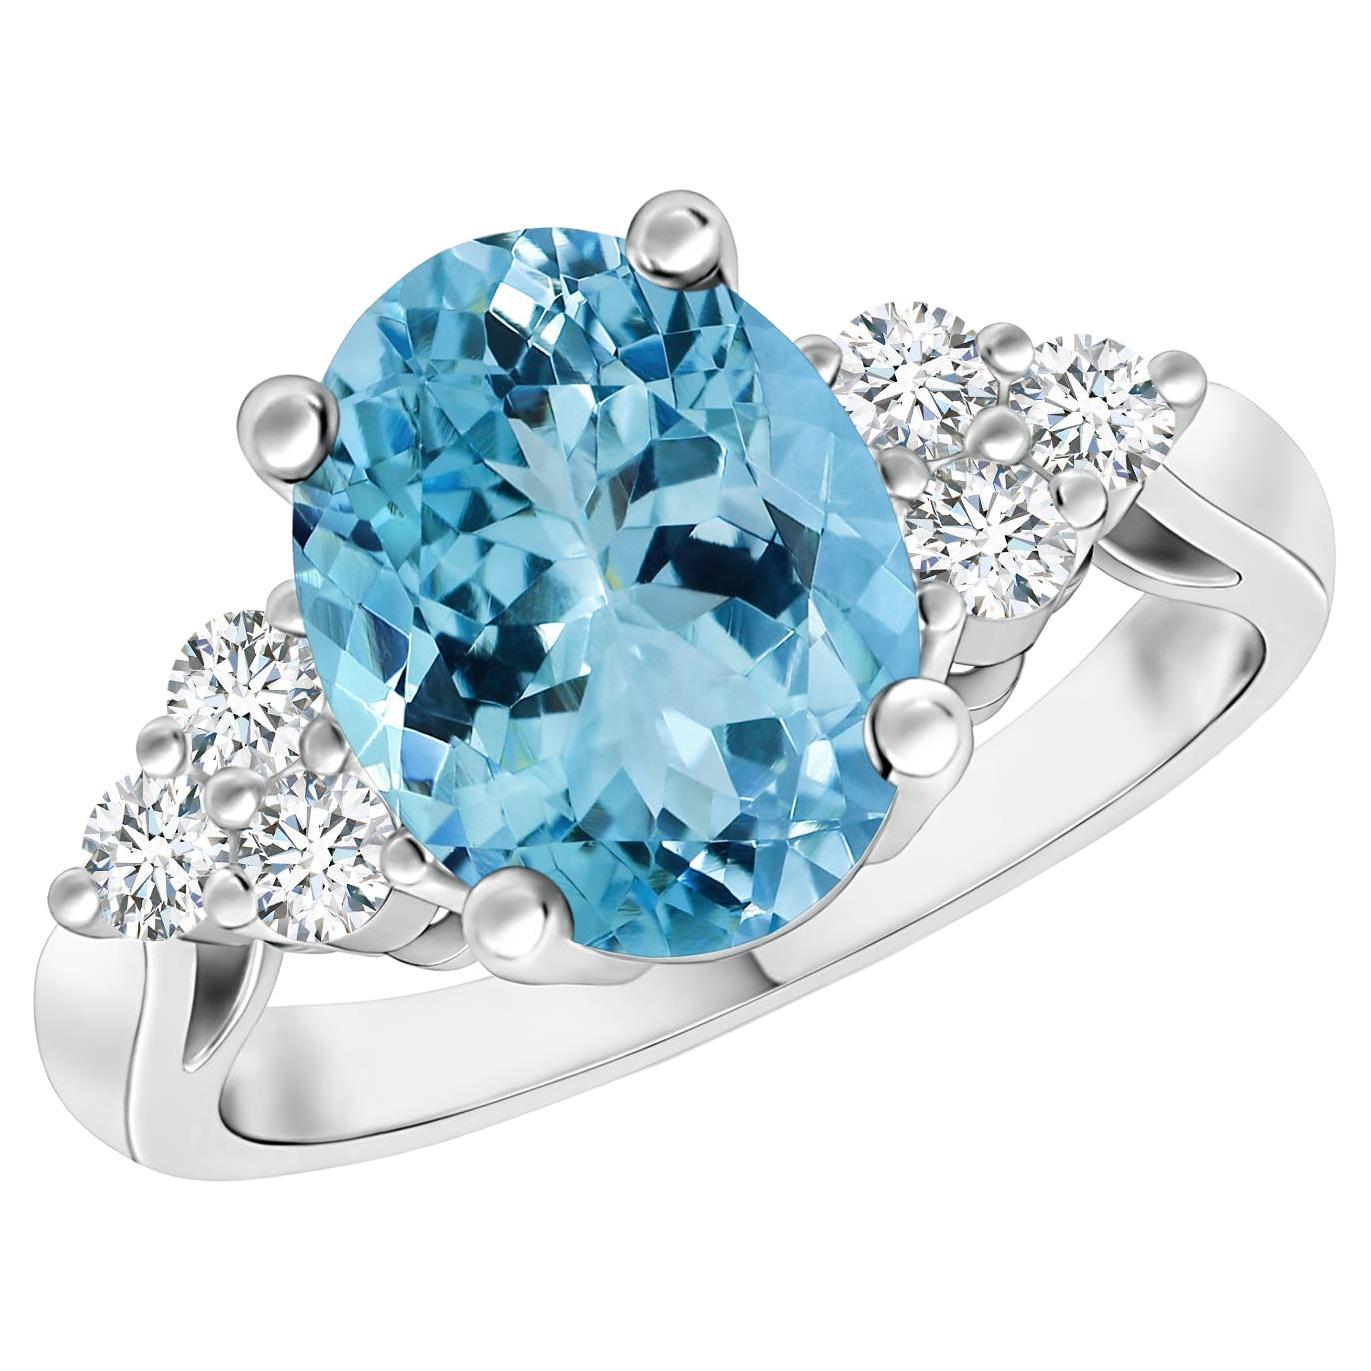 For Sale:  Angara GIA Certified Natural Aquamarine & Diamond Ring in White Gold